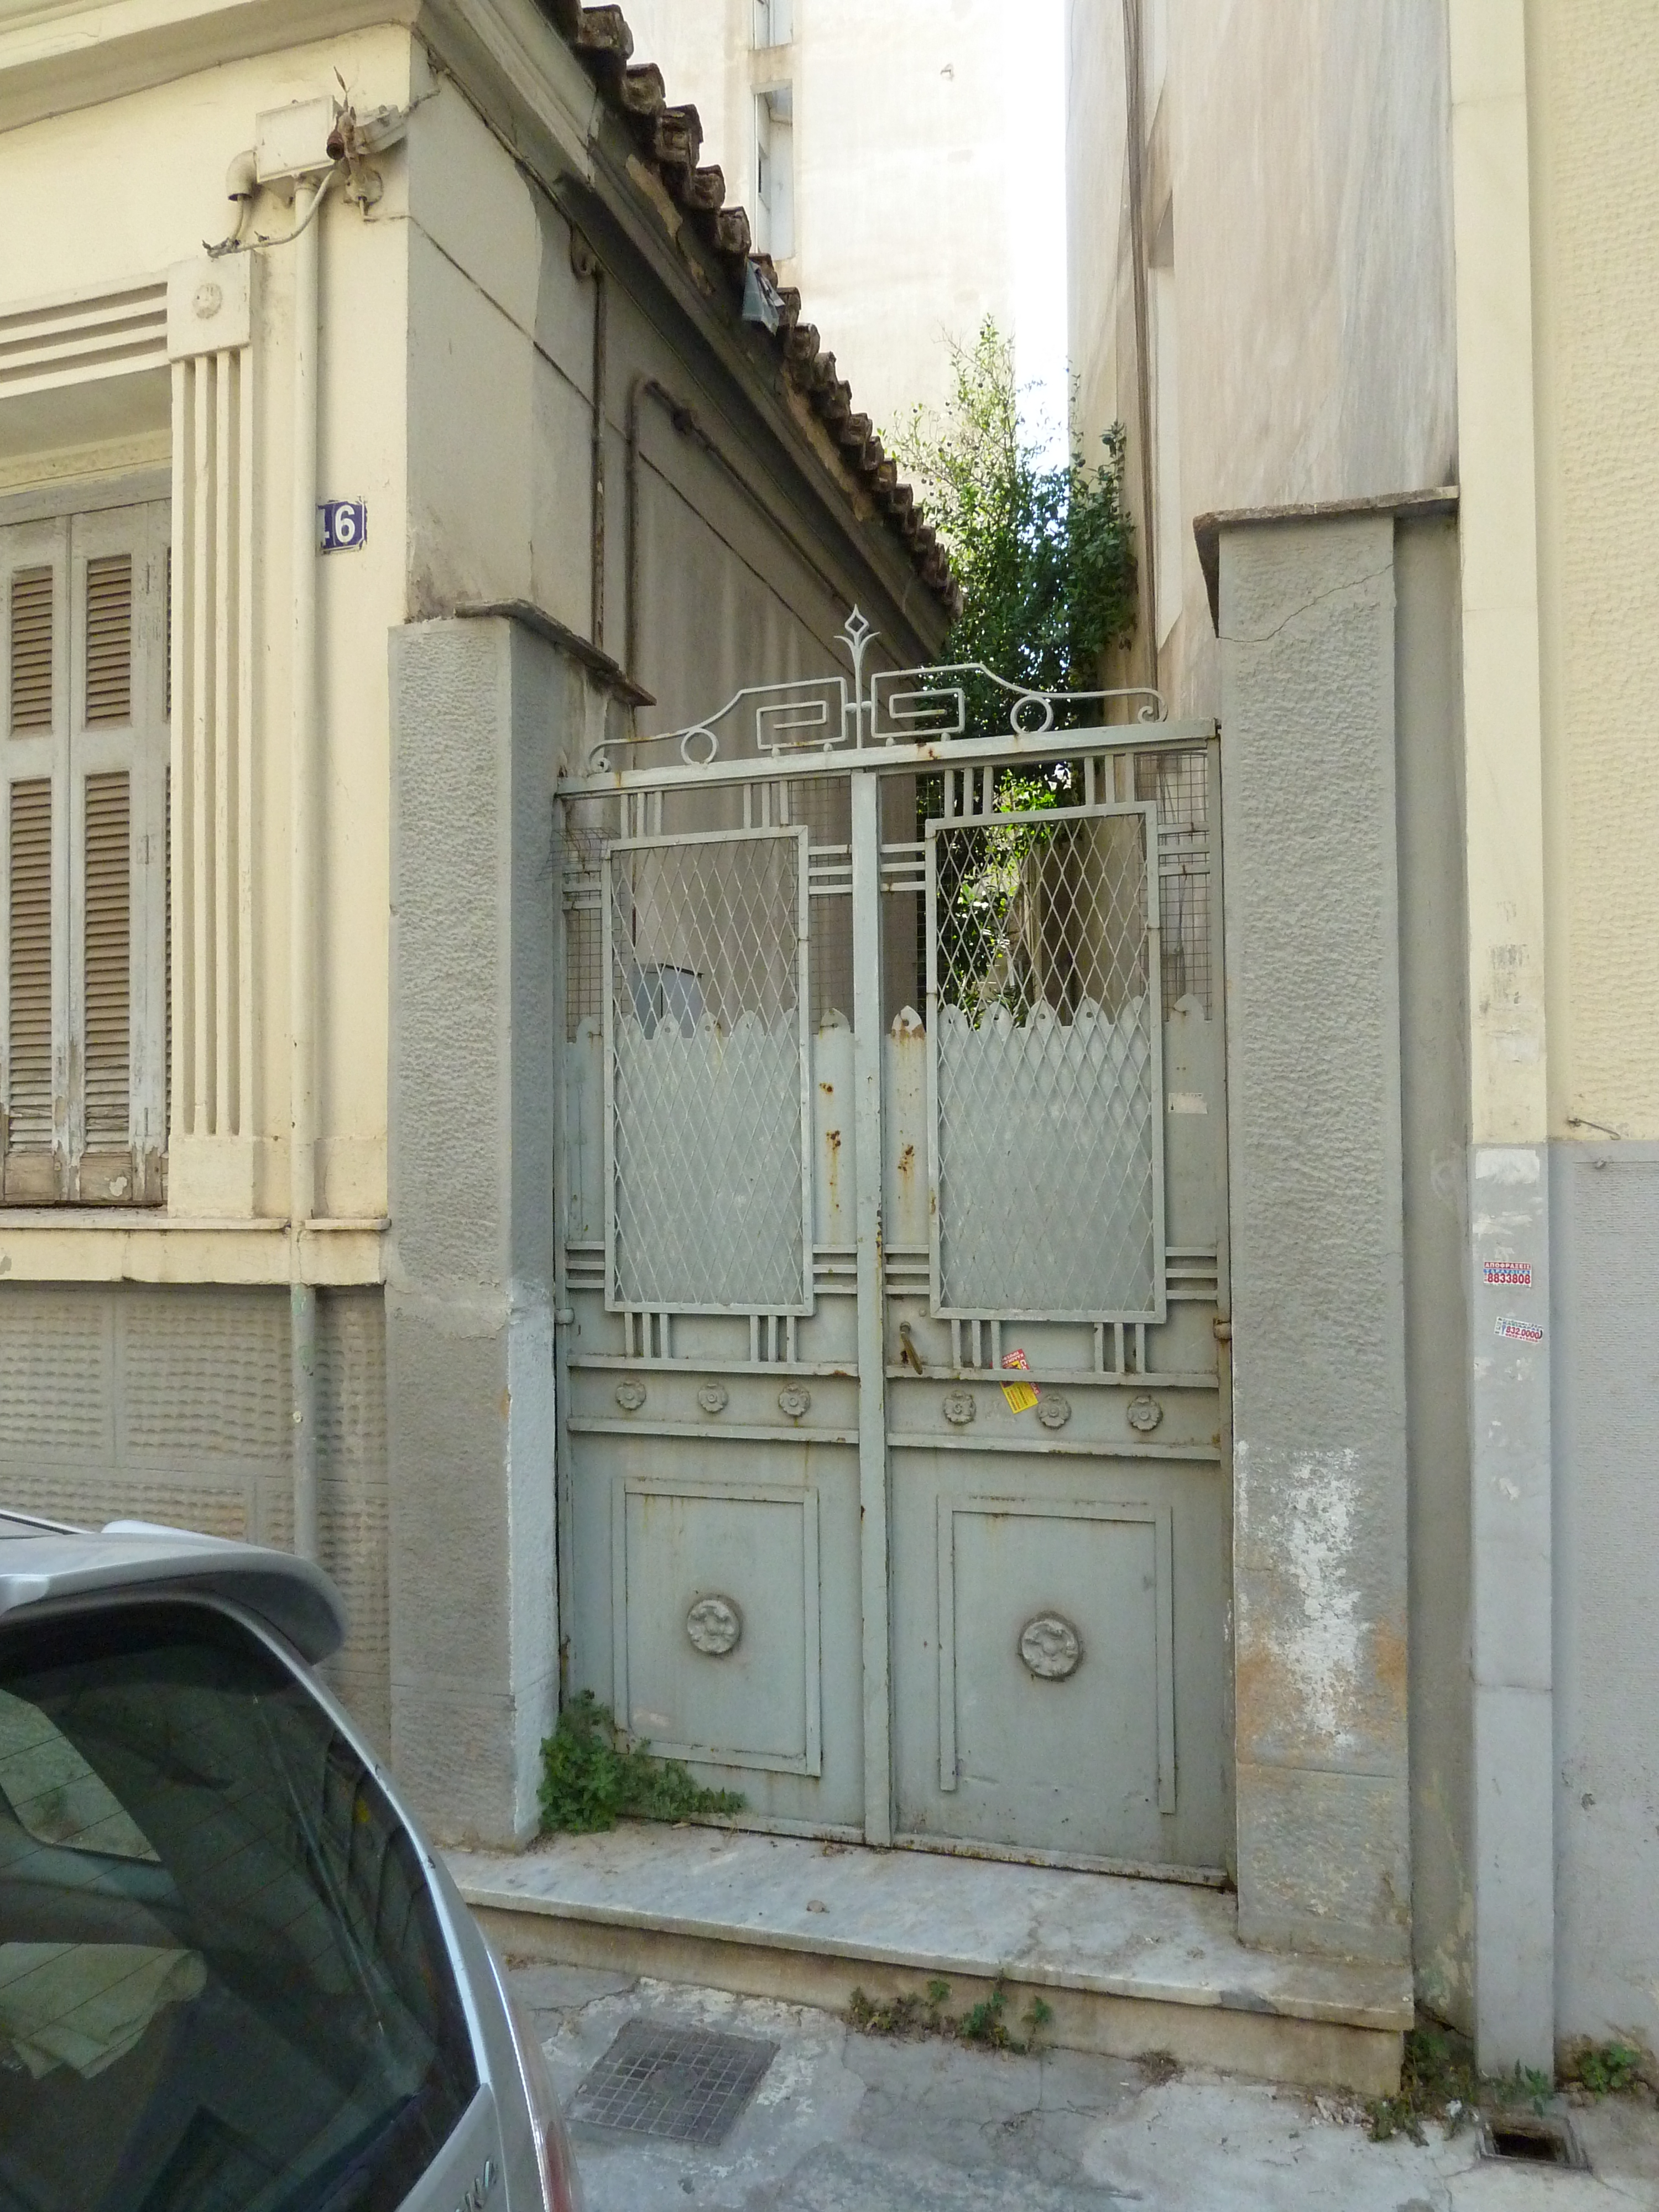 View of yard gate (2013)